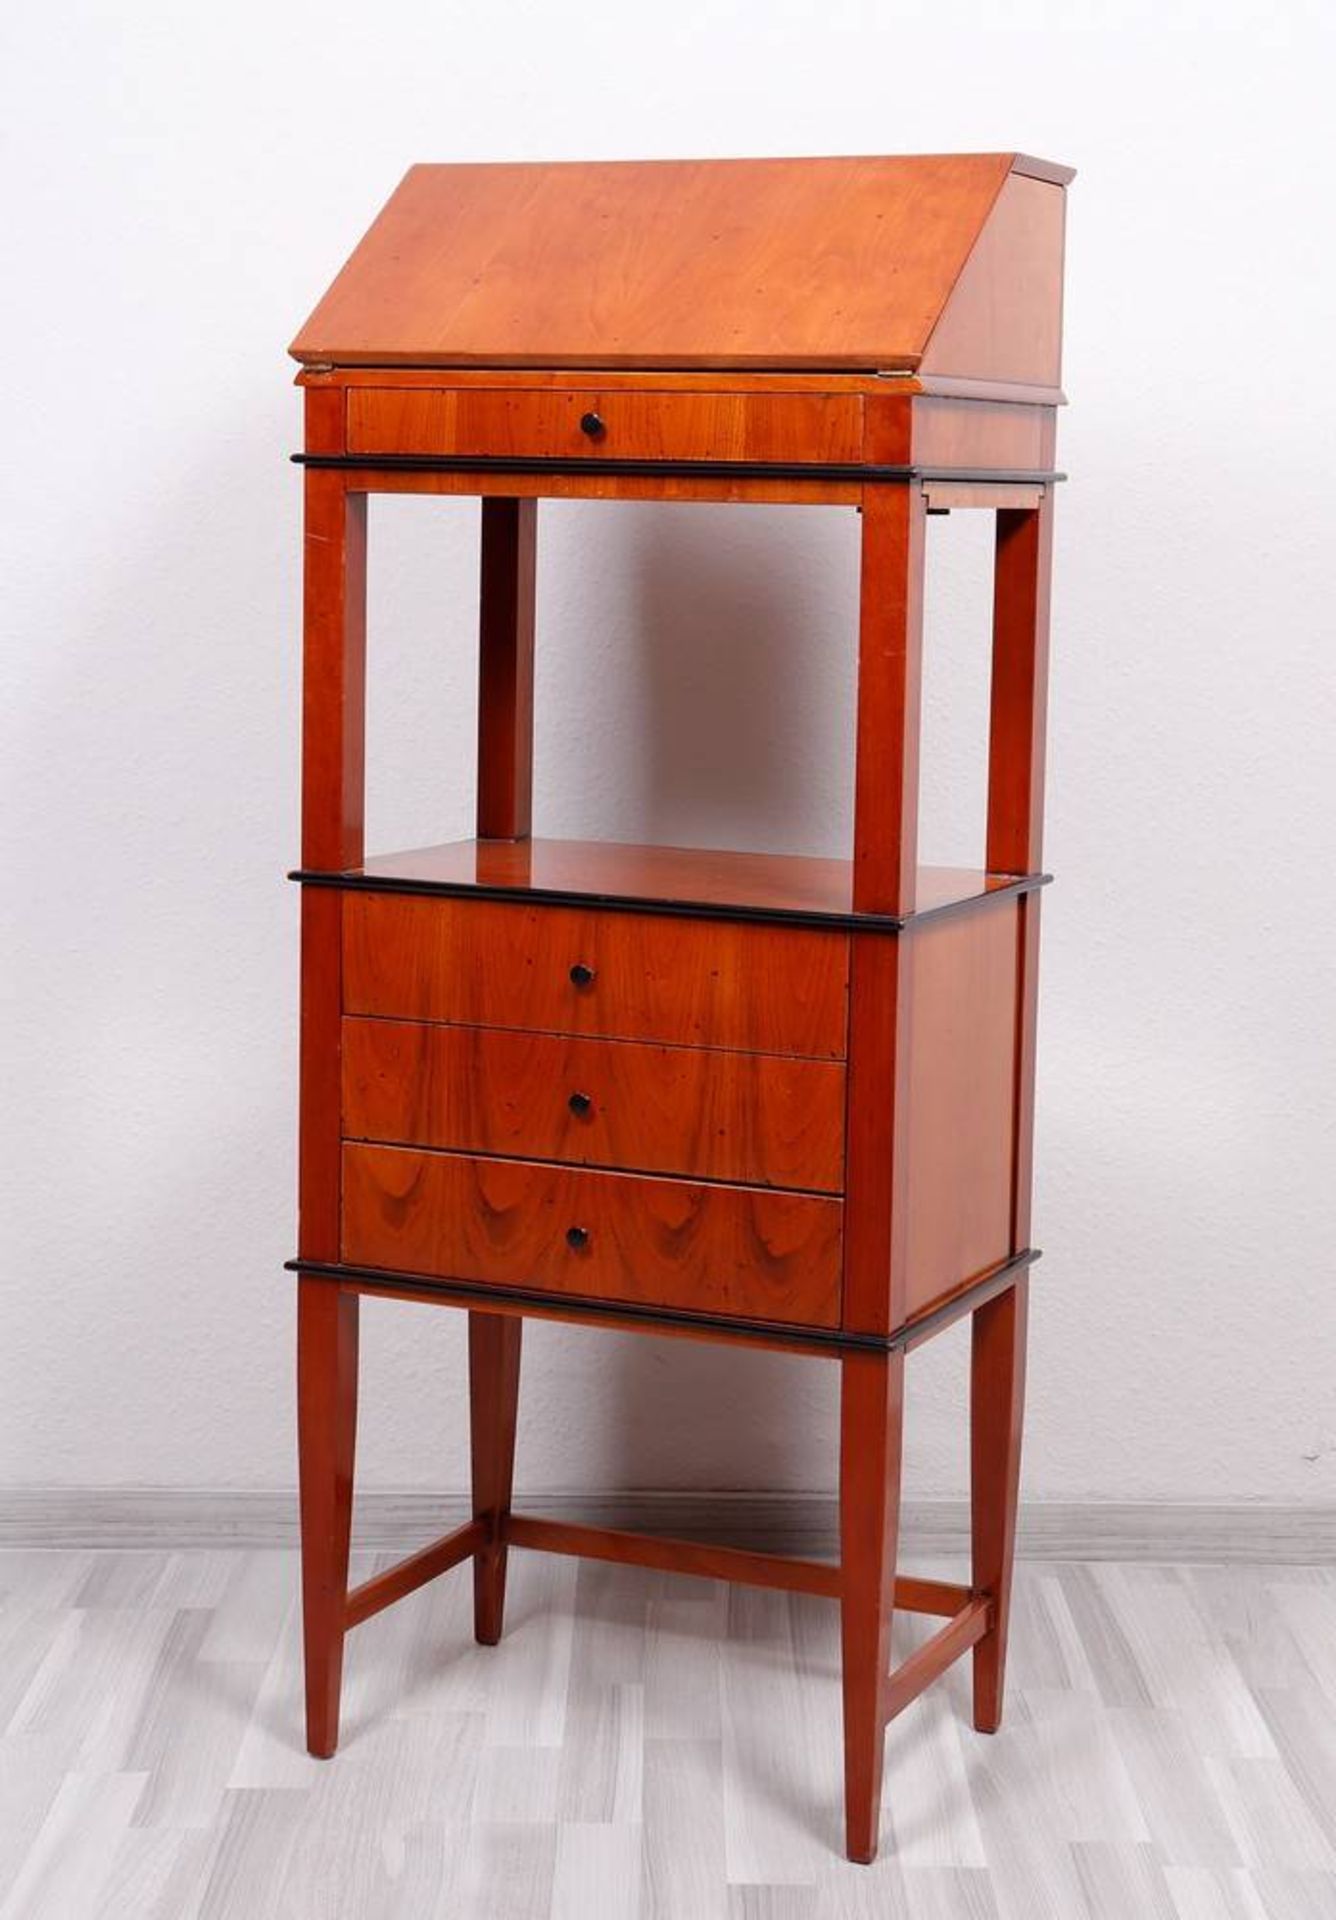 Small standing desk, probably German, 20th C.